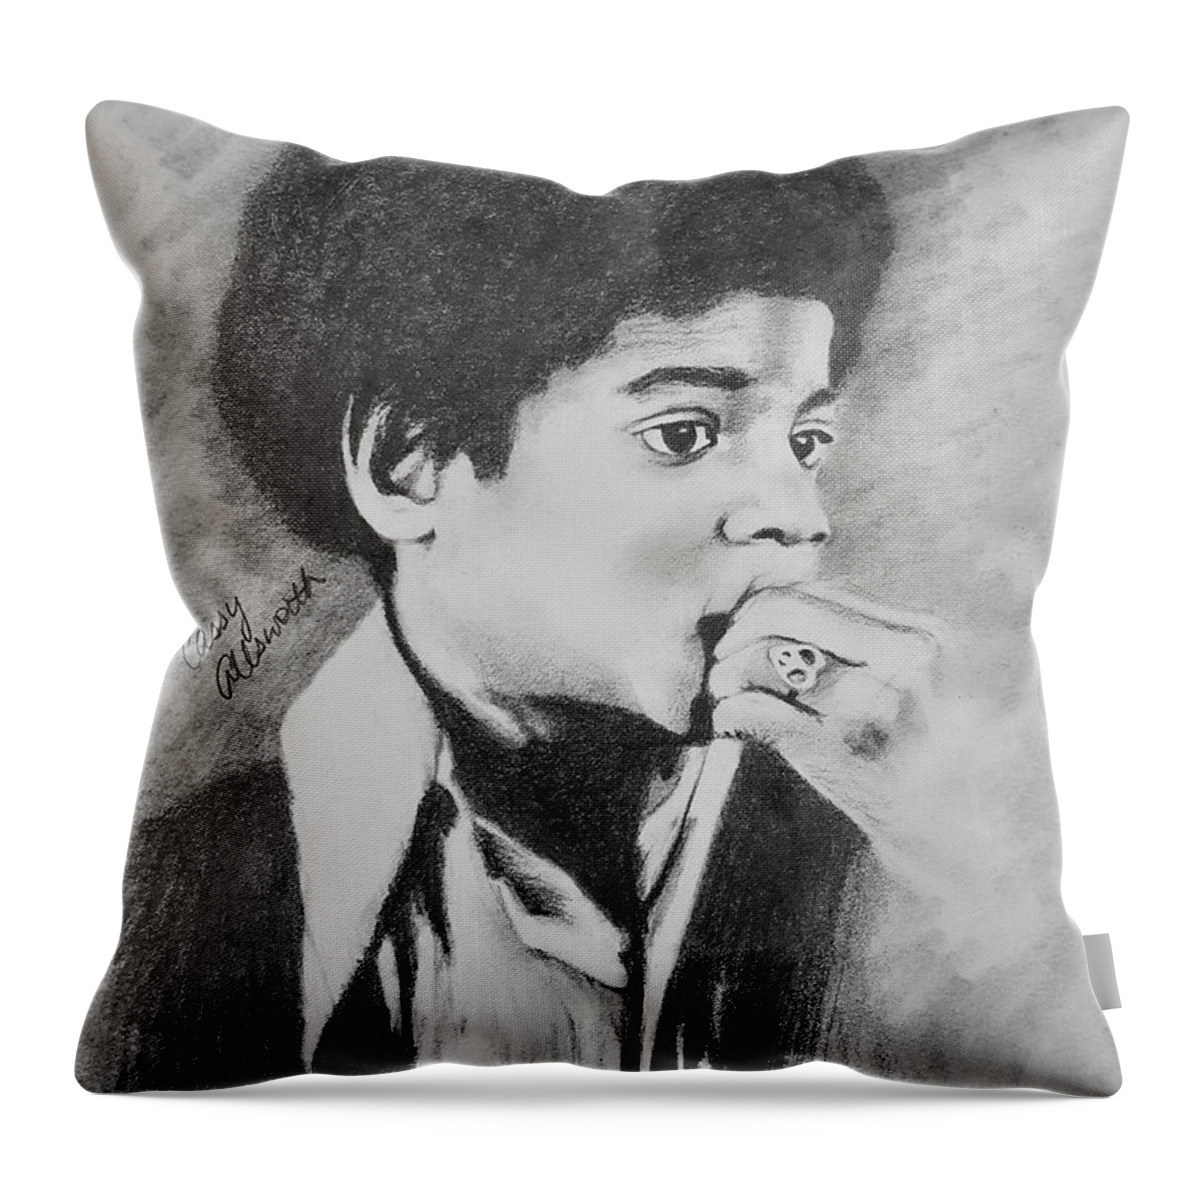 Michael Jackson Throw Pillow featuring the drawing Childlike by Cassy Allsworth